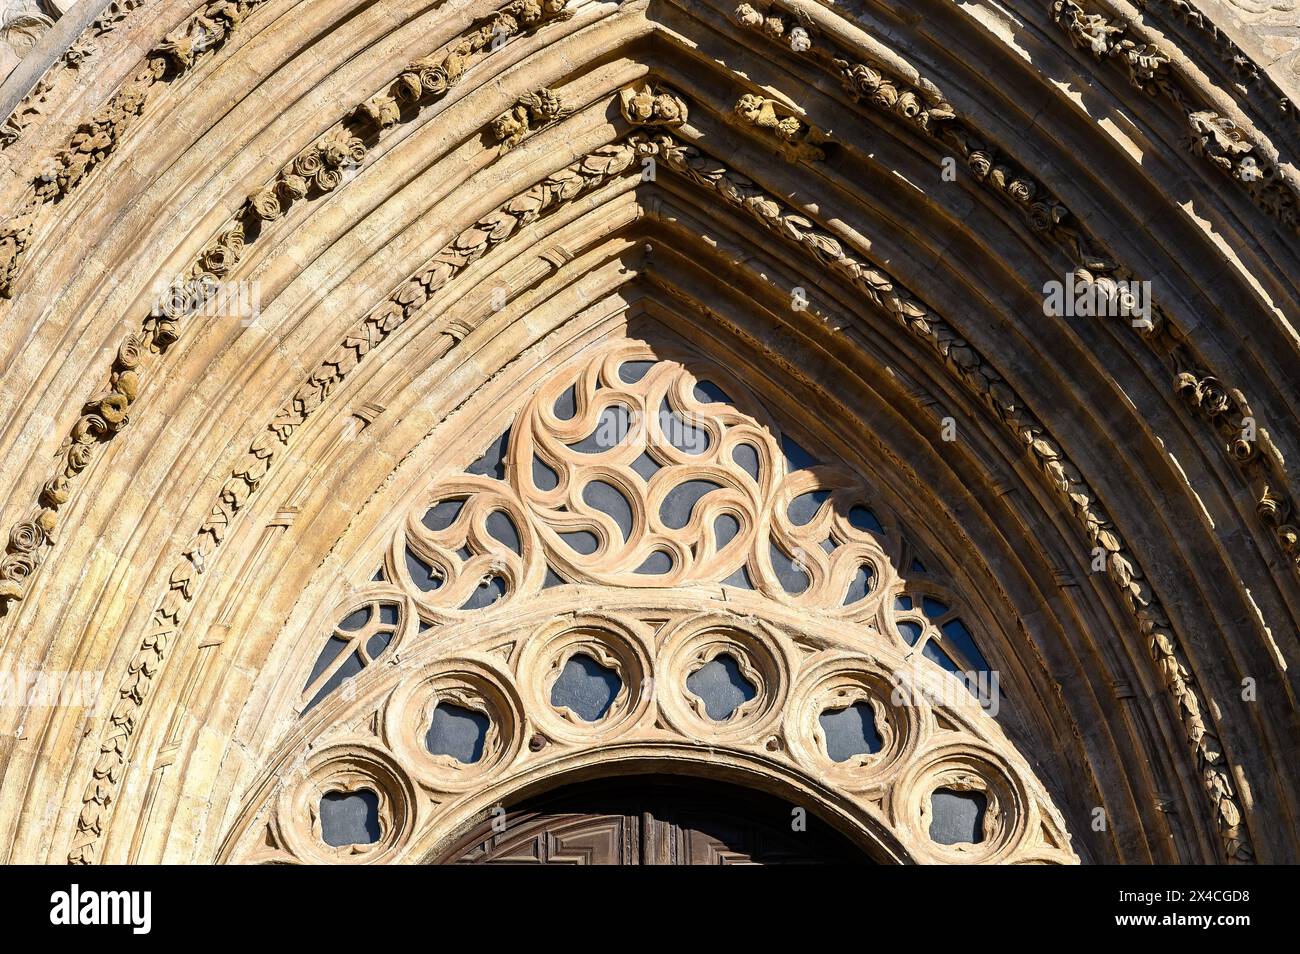 Medieval Catholic cathedral architecture building, Avila, Spain Stock Photo